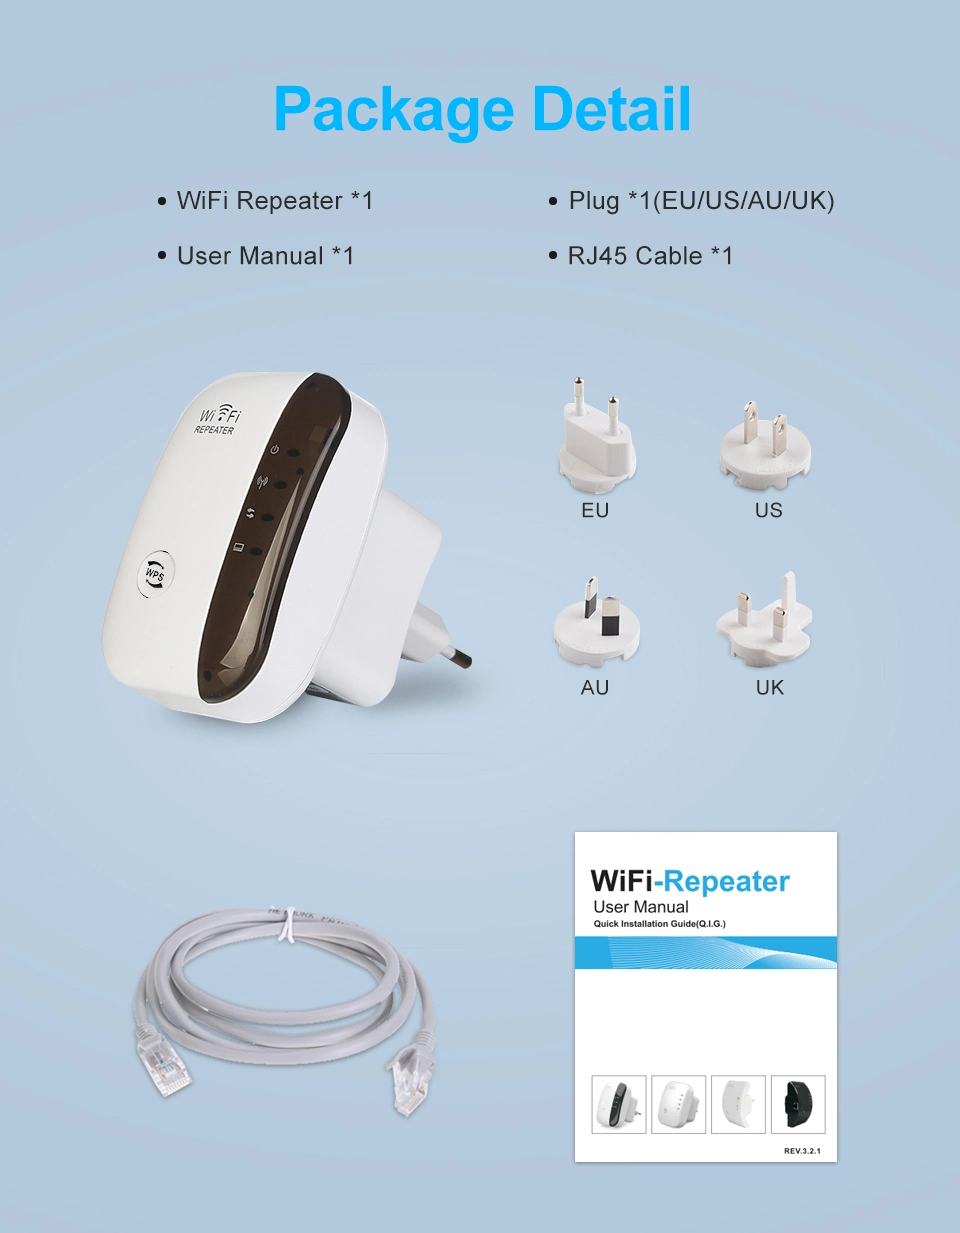 WiFi Range Extender 300Mbps WiFi Repeater 802.11n Signal Booster Amplifier